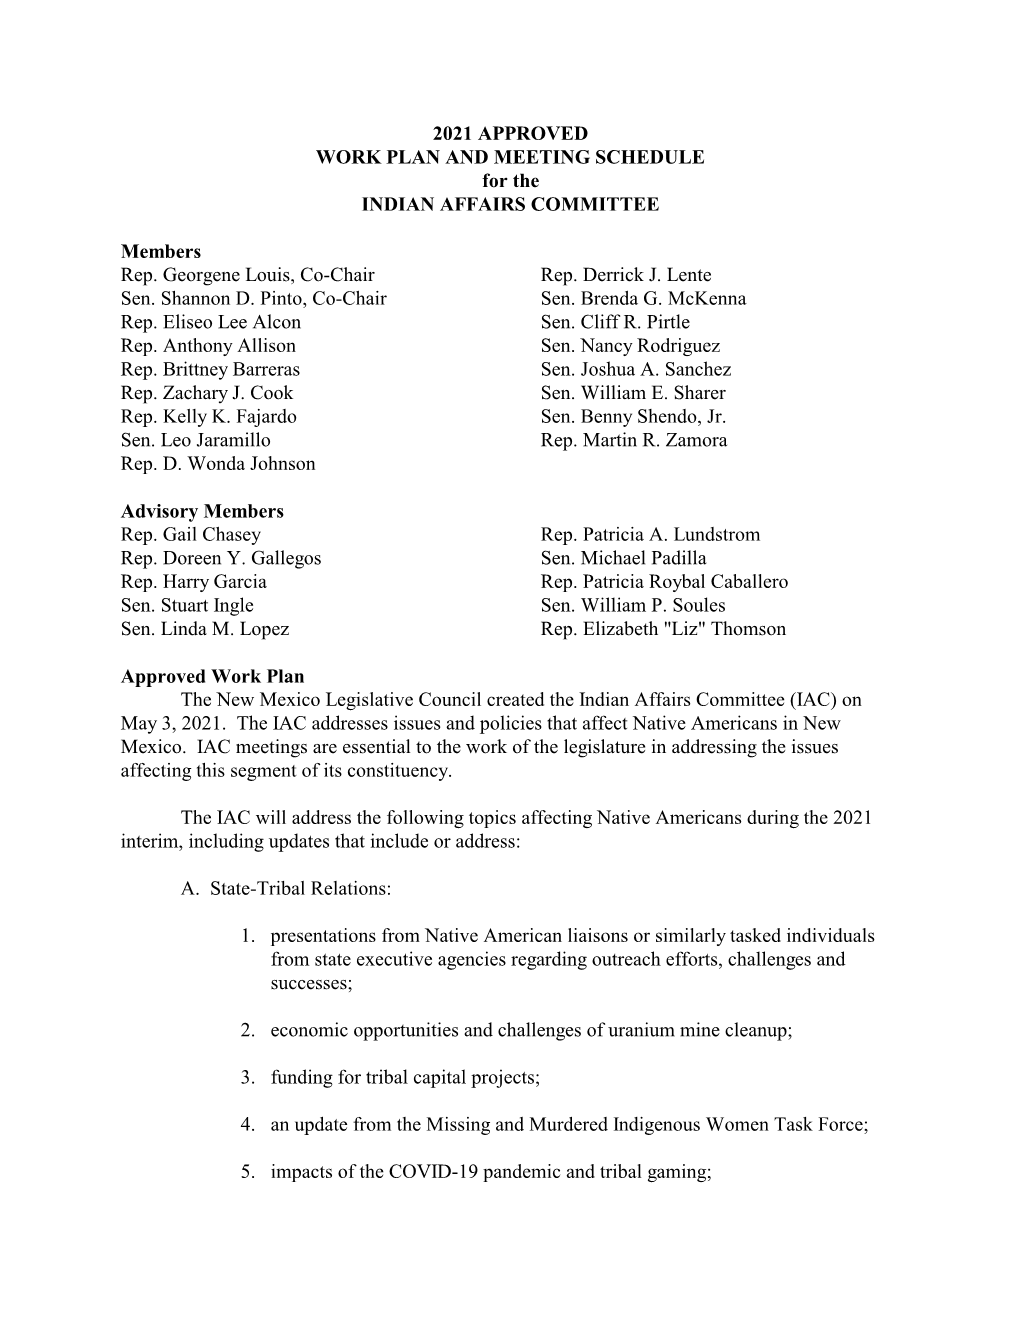 2021 APPROVED WORK PLAN and MEETING SCHEDULE for the INDIAN AFFAIRS COMMITTEE Members Rep. Georgene Louis, Co-Chair Sen. Shannon